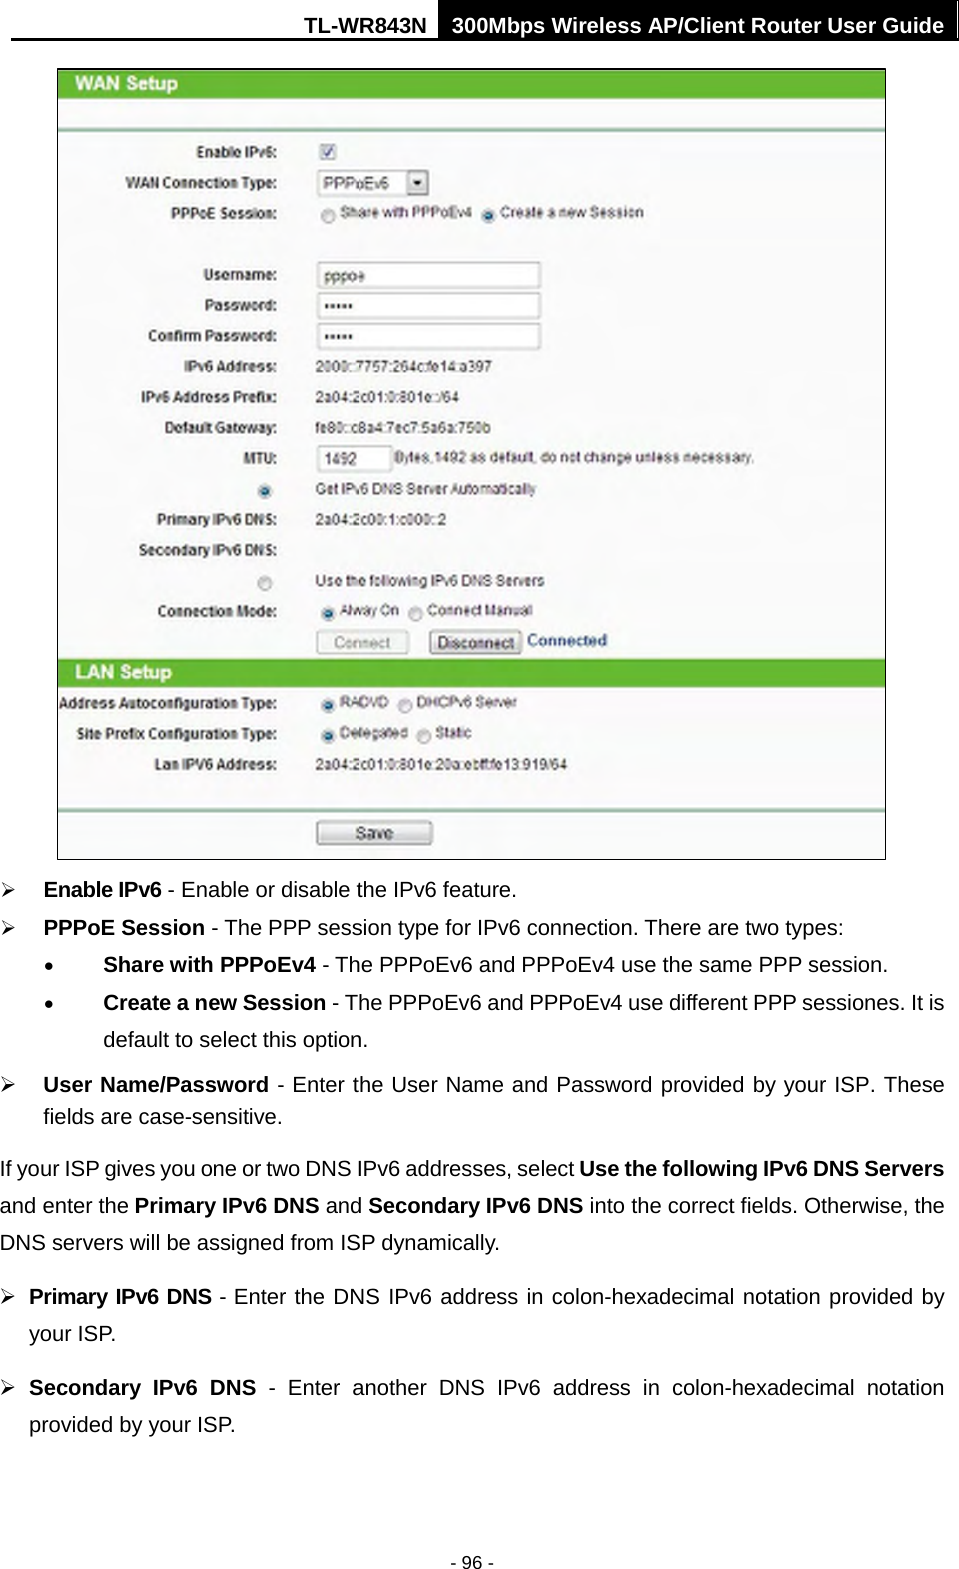 TL-WR843N 300Mbps Wireless AP/Client Router User Guide - 96 - Enable IPv6 - Enable or disable the IPv6 feature.PPPoE Session - The PPP session type for IPv6 connection. There are two types:•Share with PPPoEv4 - The PPPoEv6 and PPPoEv4 use the same PPP session.•Create a new Session - The PPPoEv6 and PPPoEv4 use different PPP sessiones. It isdefault to select this option.User Name/Password - Enter the User Name and Password provided by your ISP. Thesefields are case-sensitive.If your ISP gives you one or two DNS IPv6 addresses, select Use the following IPv6 DNS Servers and enter the Primary IPv6 DNS and Secondary IPv6 DNS into the correct fields. Otherwise, the DNS servers will be assigned from ISP dynamically. Primary IPv6 DNS - Enter the DNS IPv6 address in colon-hexadecimal notation provided byyour ISP.Secondary IPv6 DNS - Enter another DNS IPv6 address in colon-hexadecimal notationprovided by your ISP.